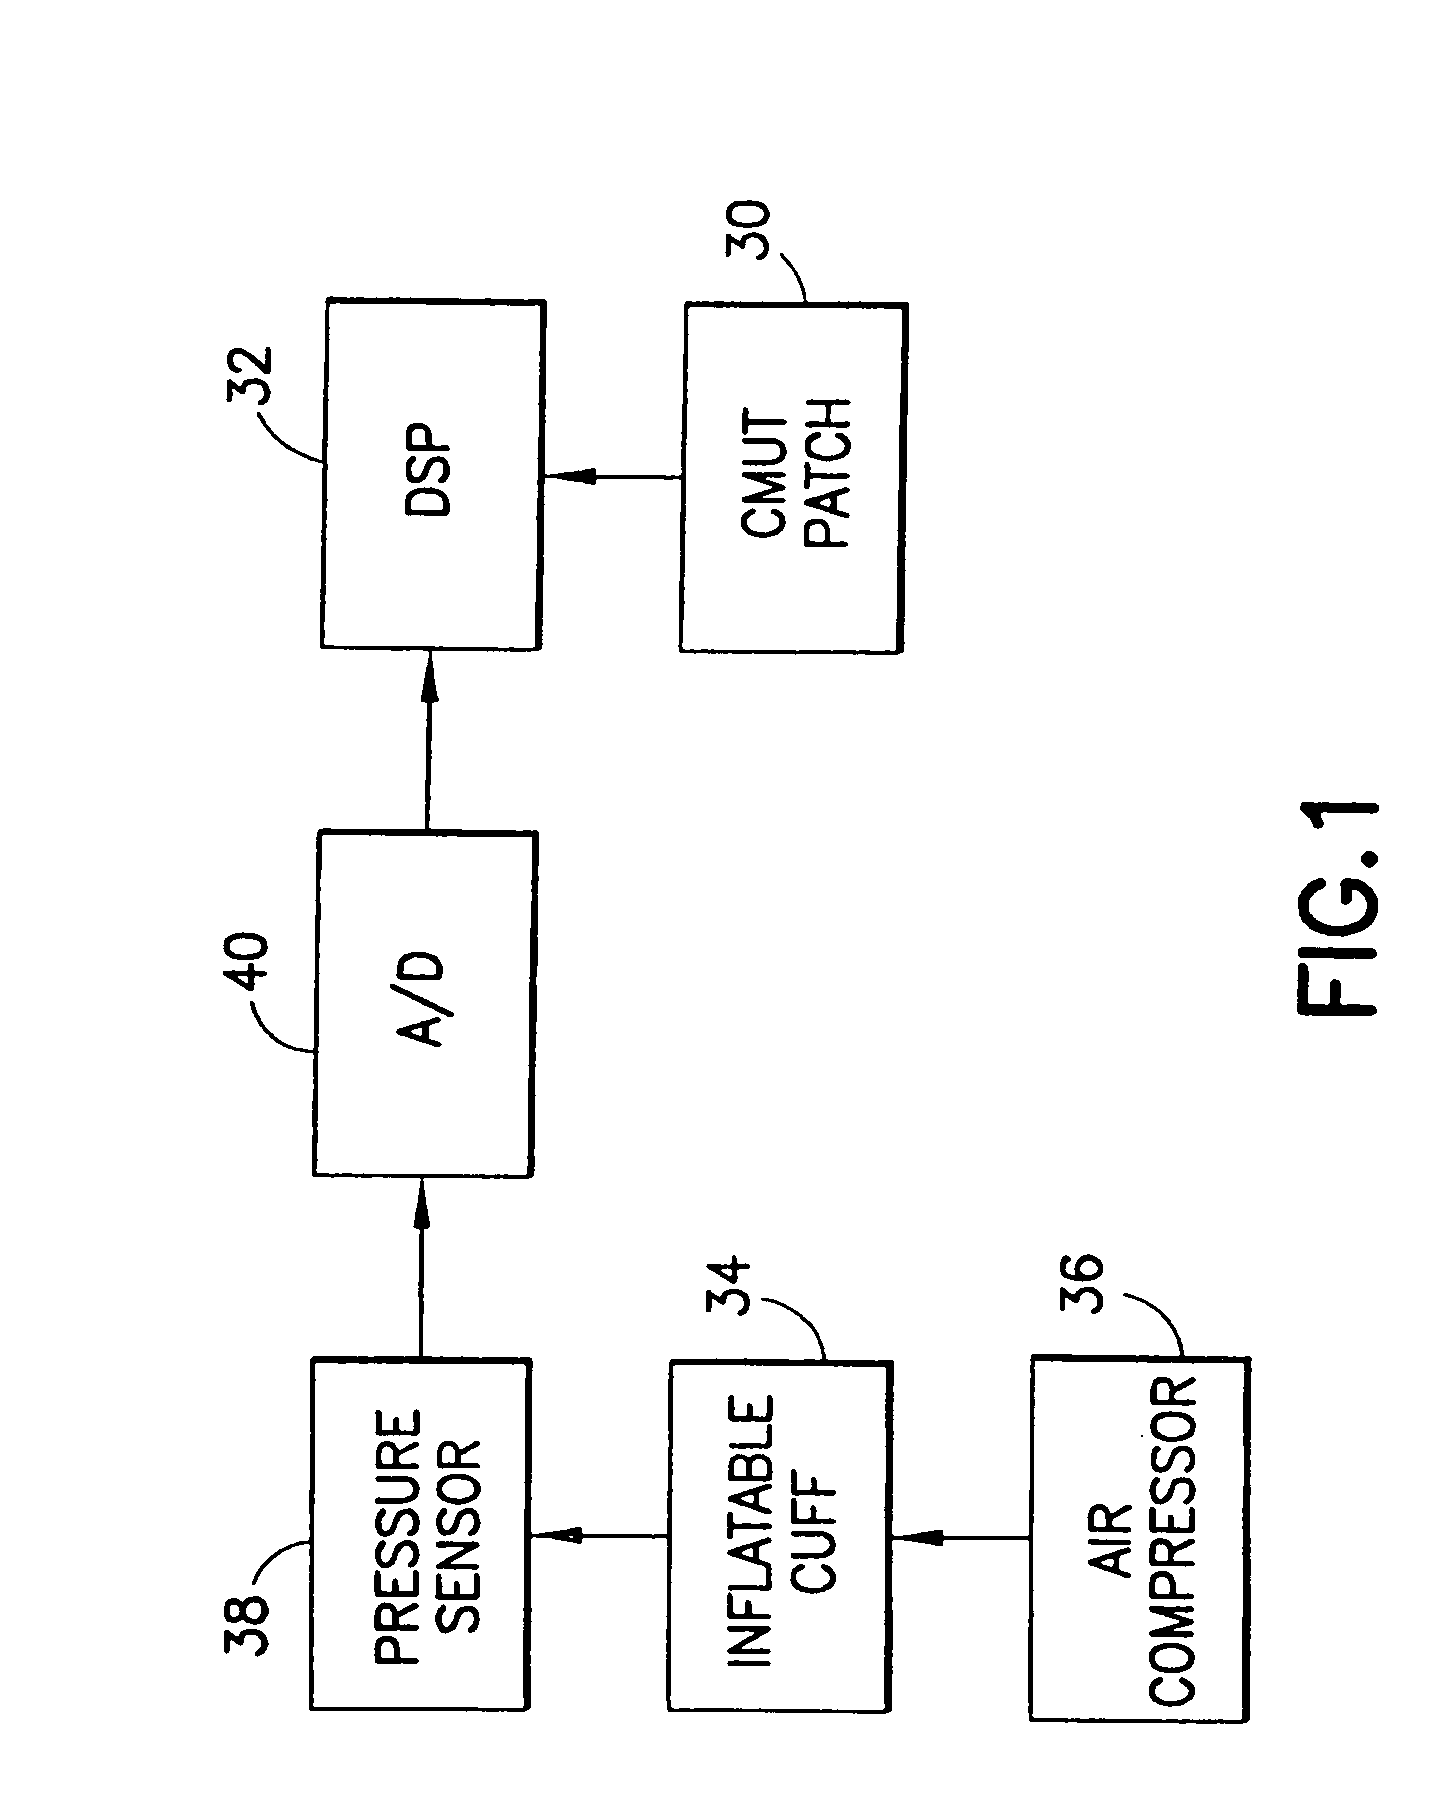 Method and apparatus for ultrasonic continuous, non-invasive blood pressure monitoring